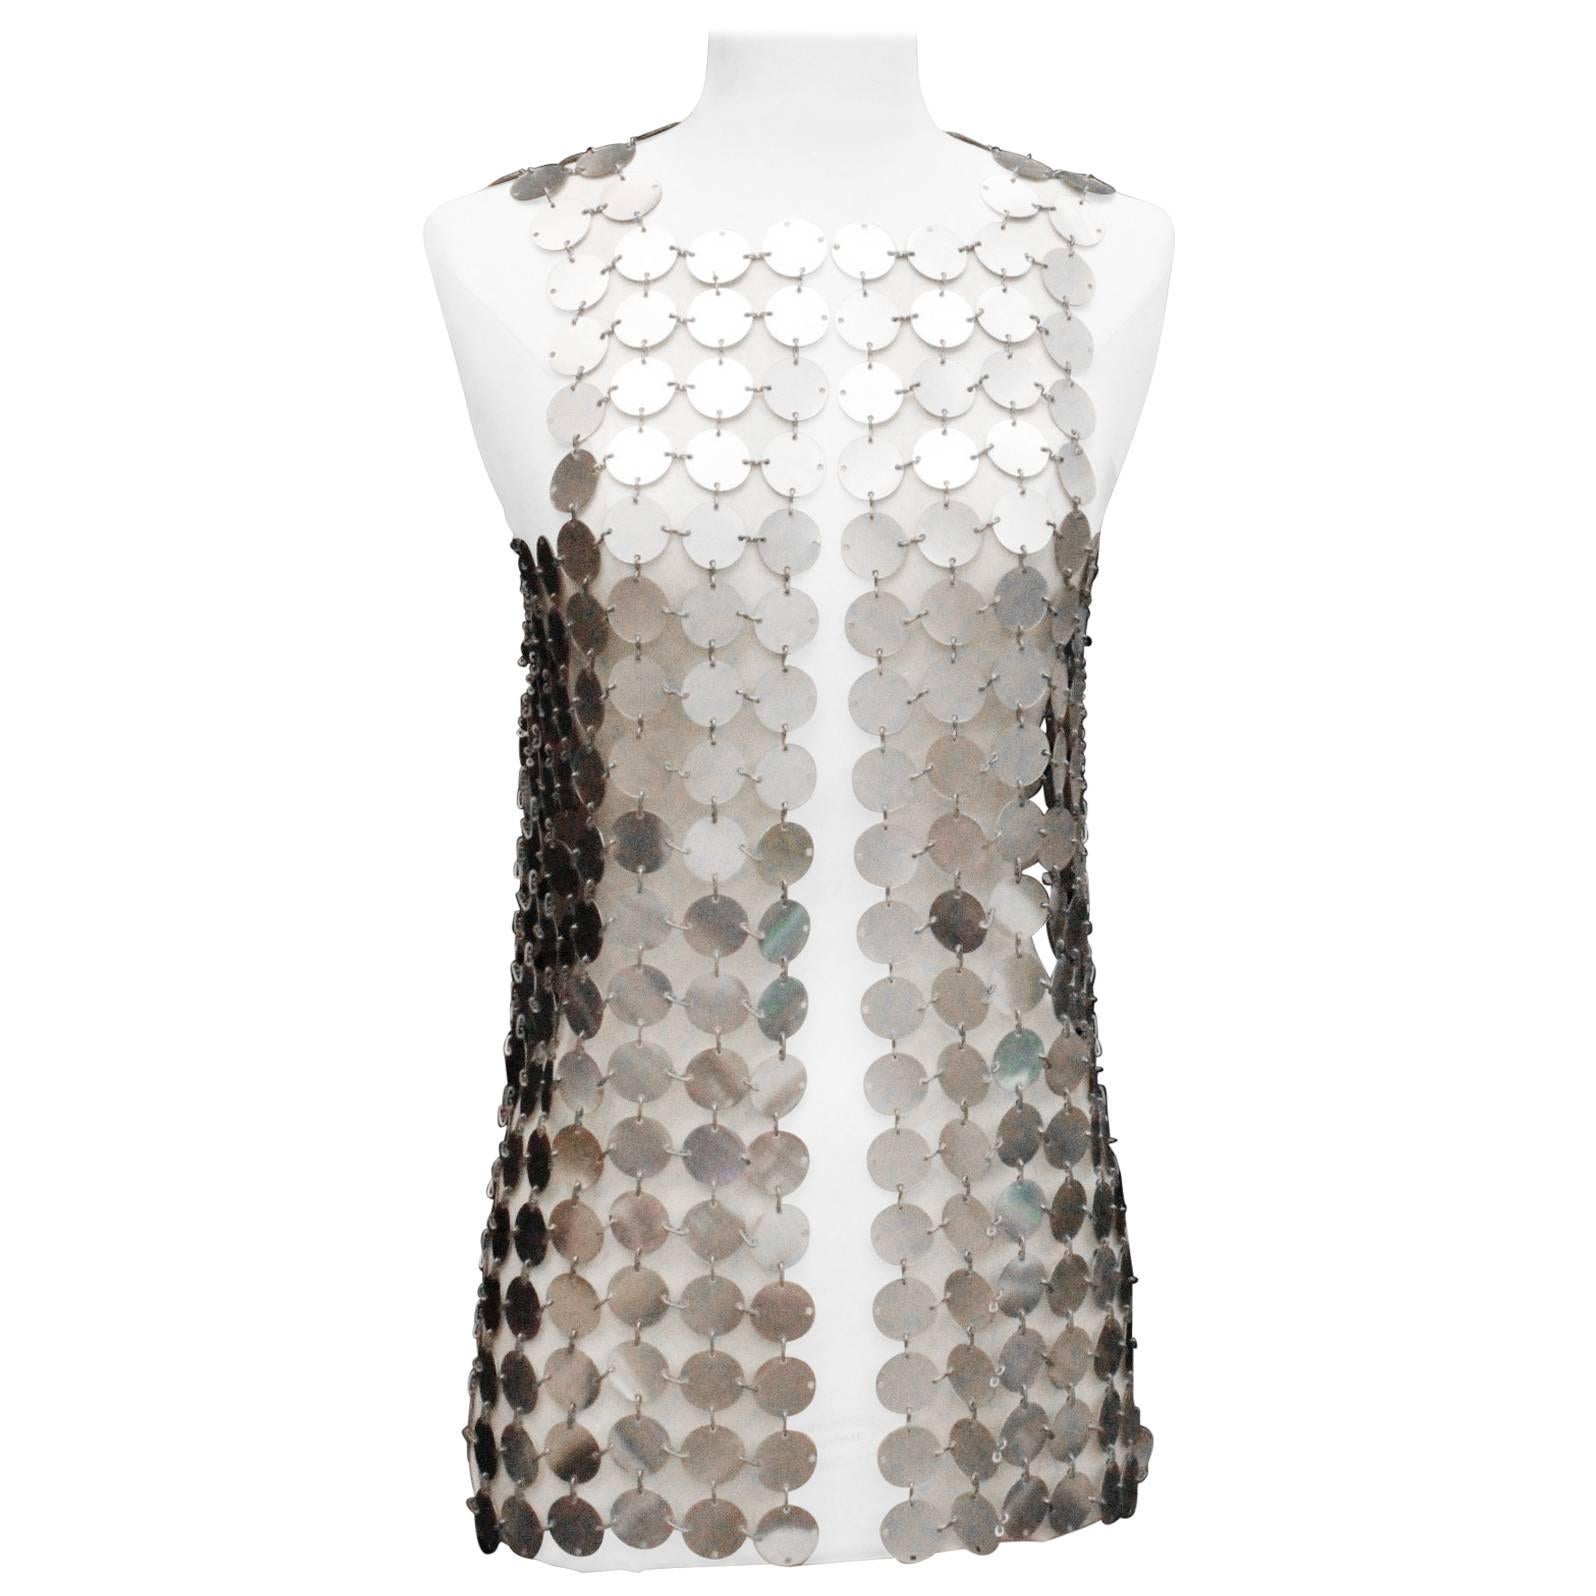 1960s-1970s Paco Rabanne vest composed of silver tone perforated discs